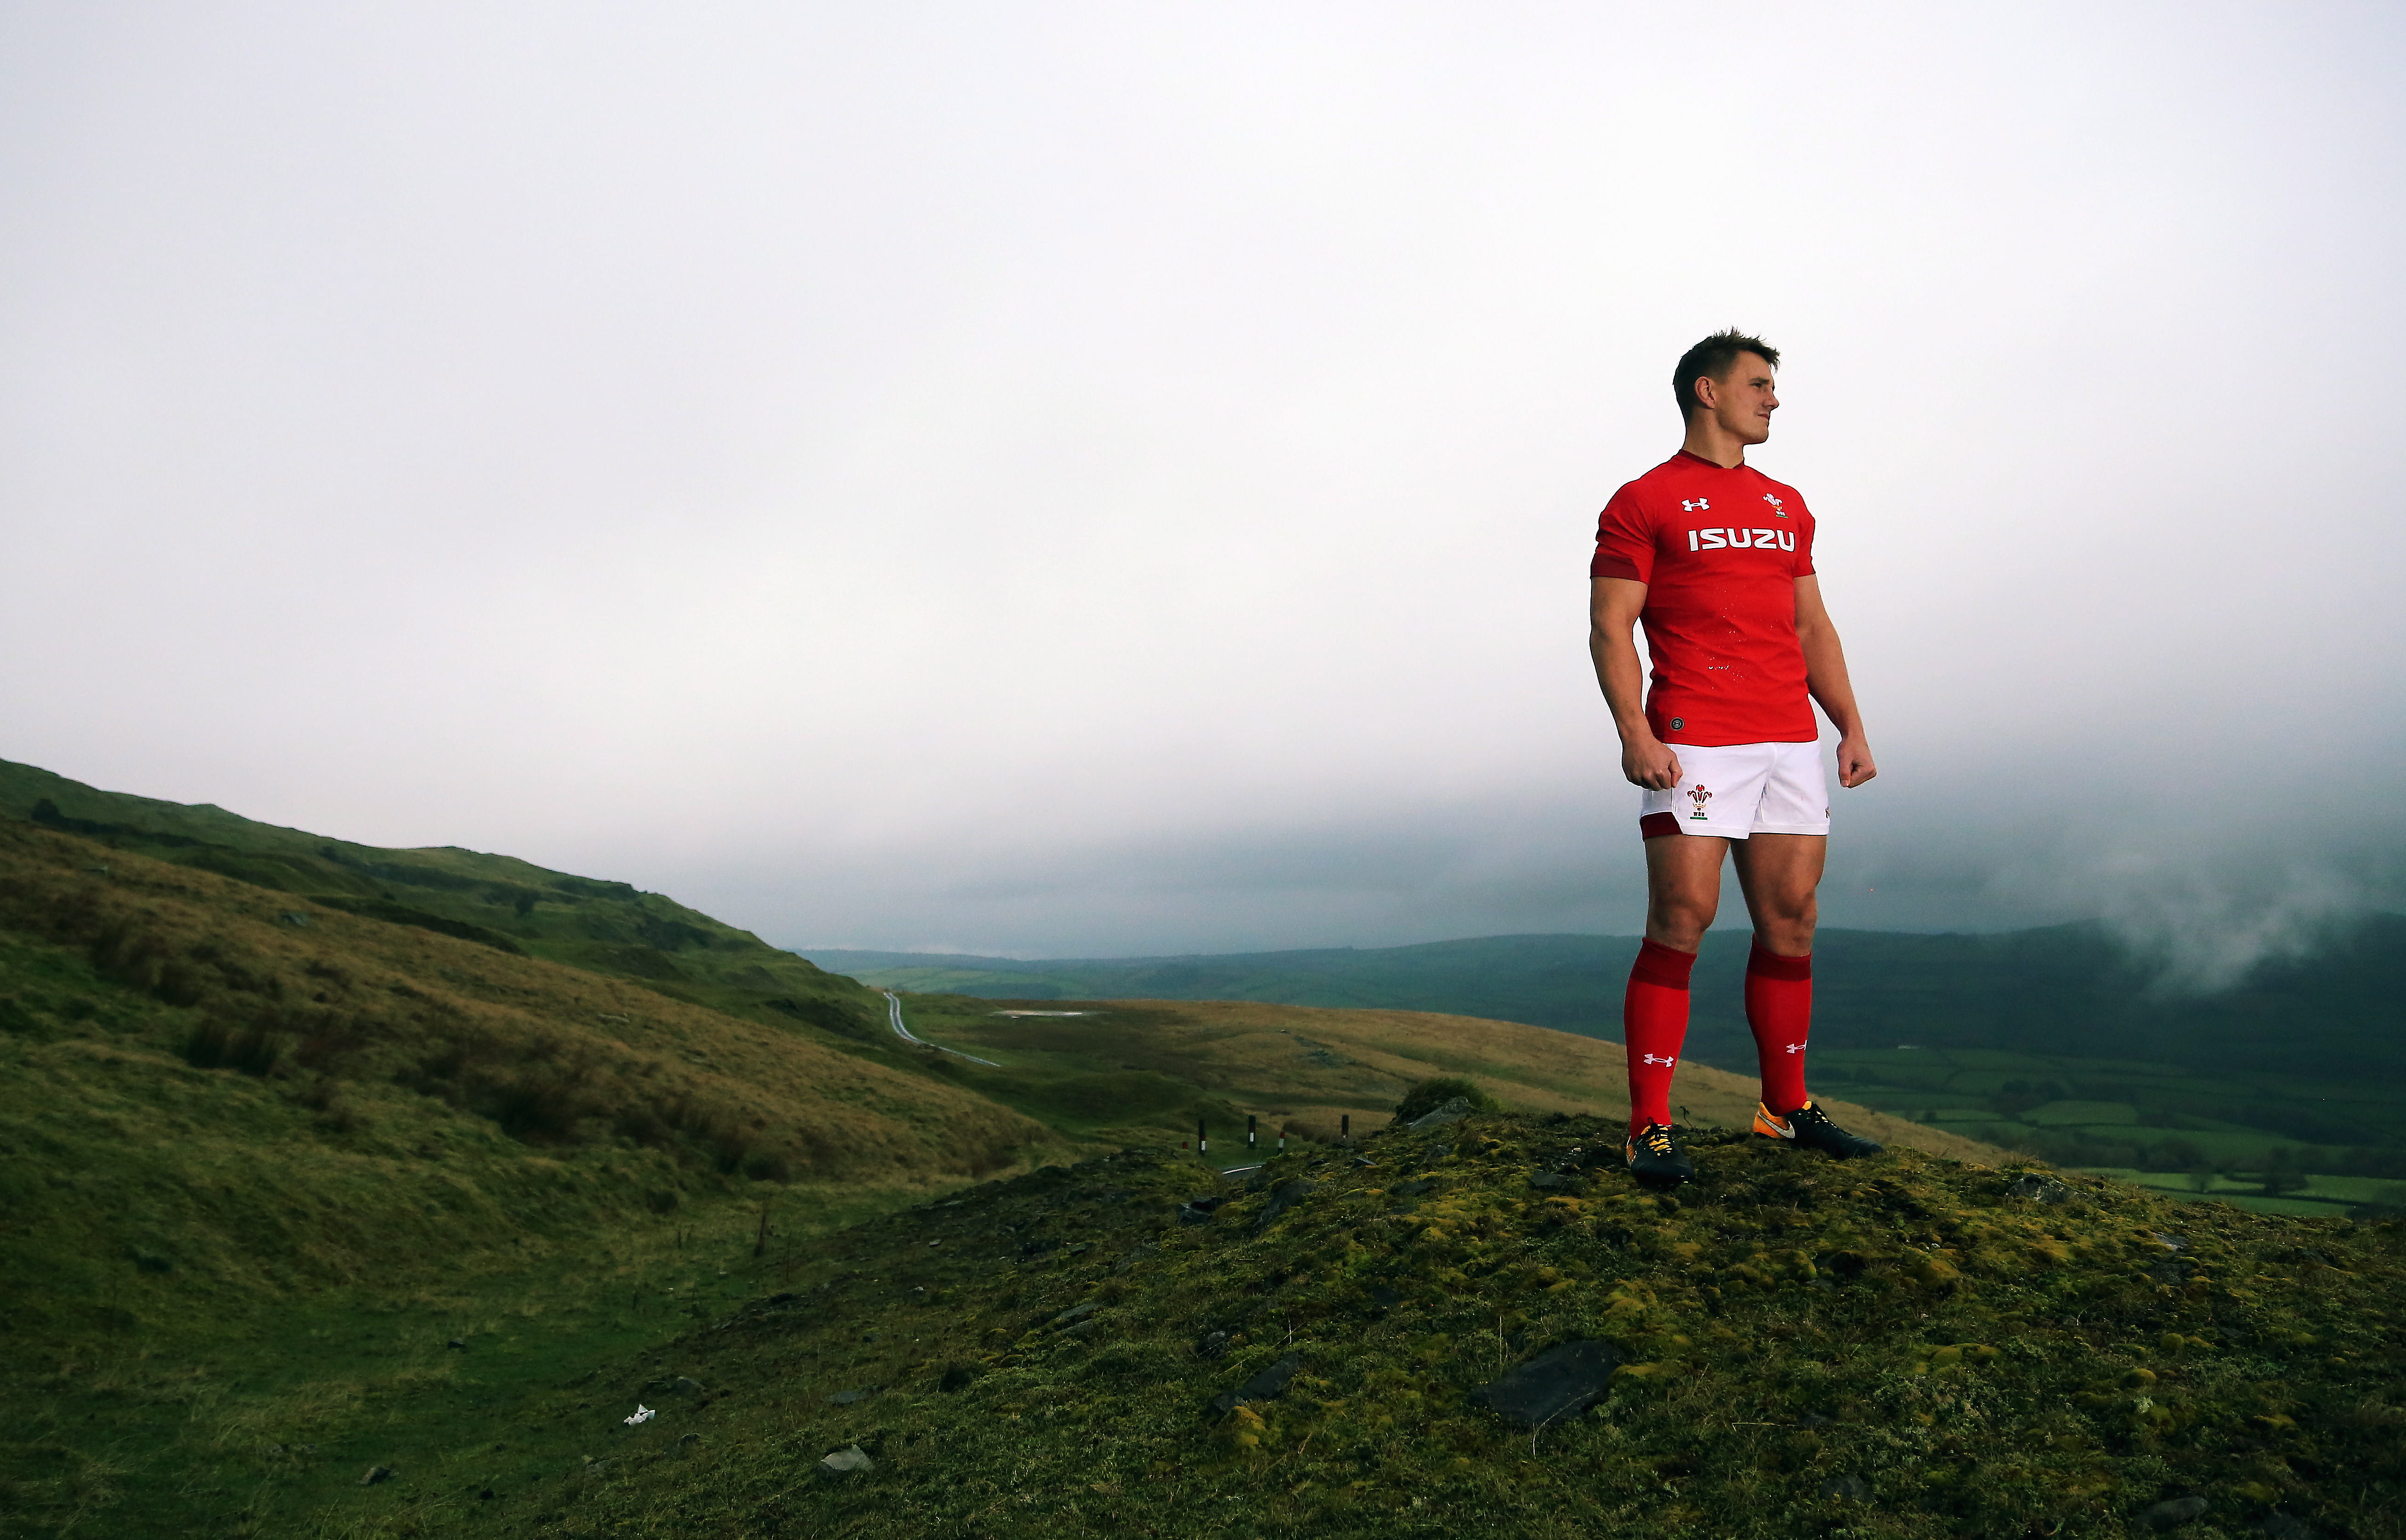 WILL KELLEHER STORY, DAILY MAIL SPORTS DESK Scarlets and Wales international rugby player Jonathan Davies in the Black Mountains, Carmarthenshire, Wales, UK. Wednesday 18 October 2017